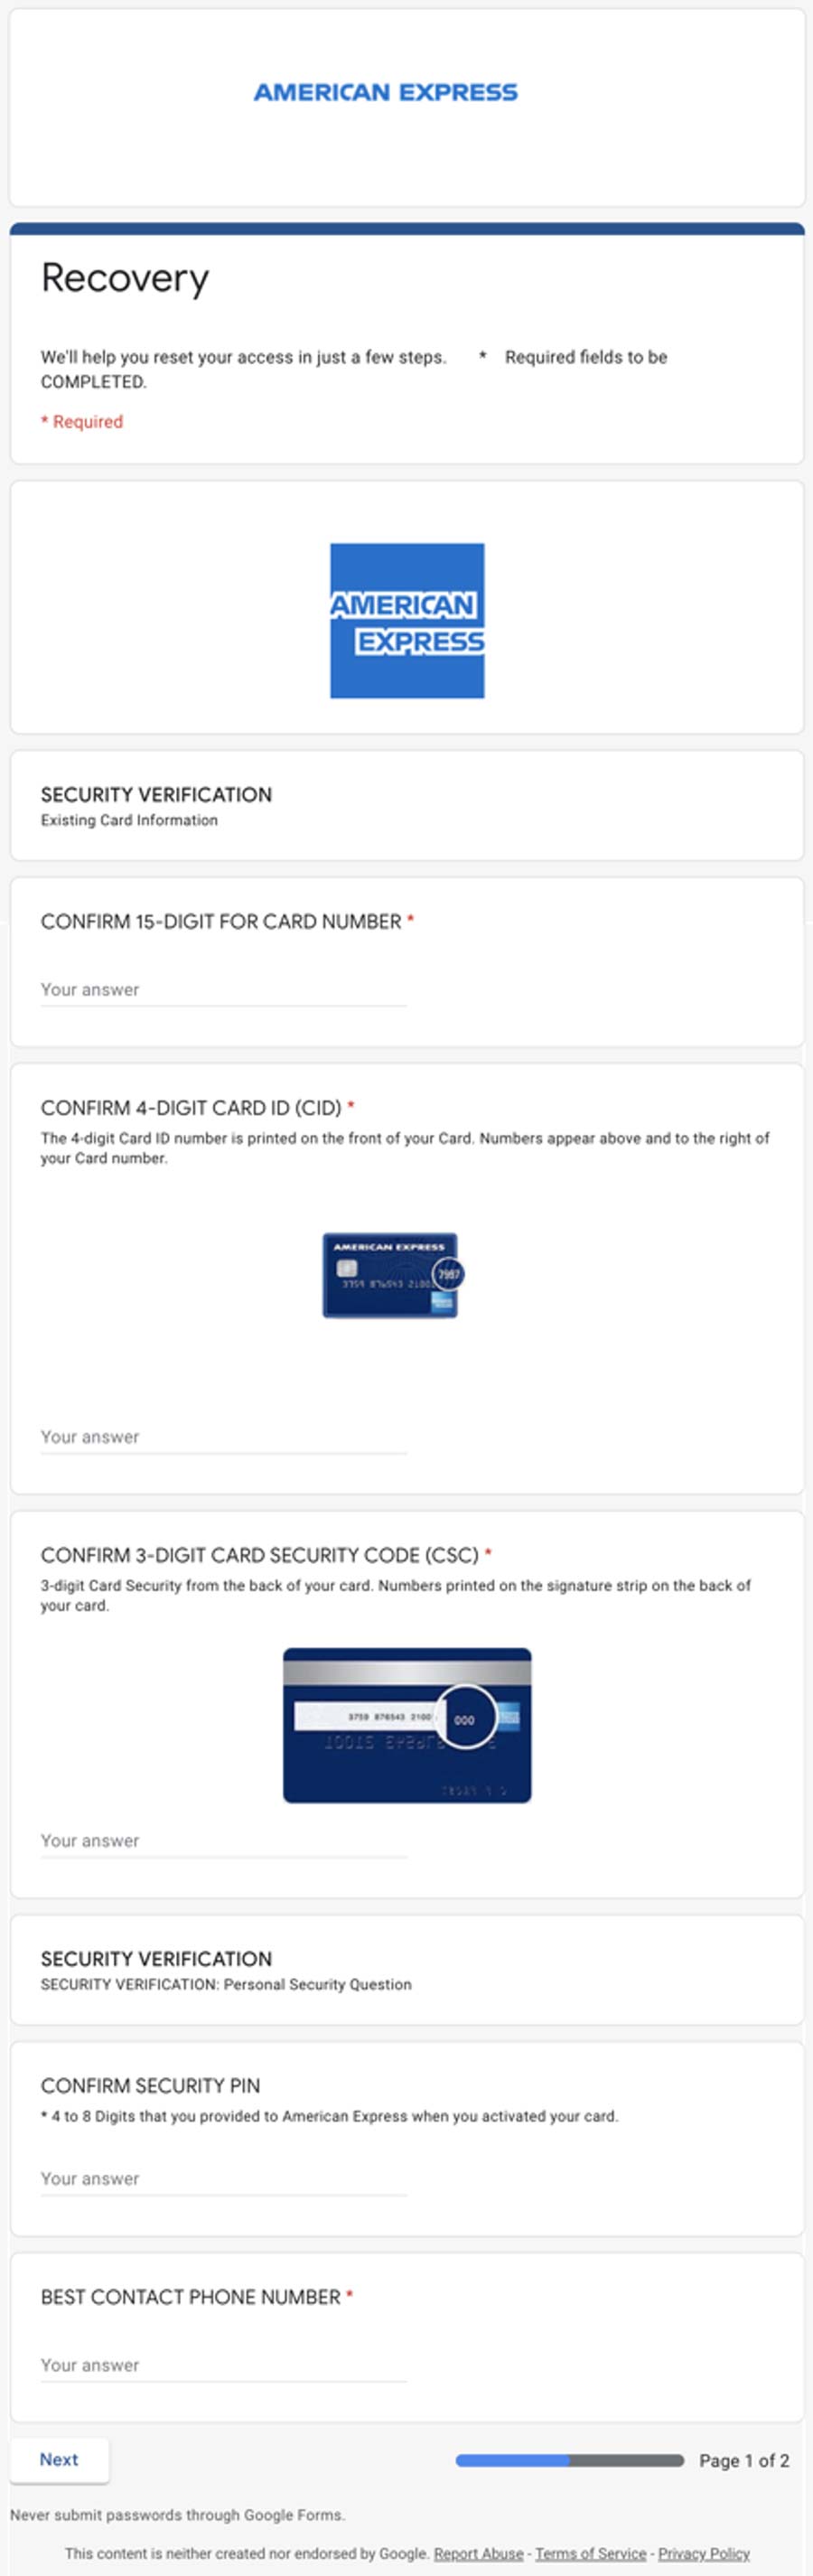 amex impersonation scam google form